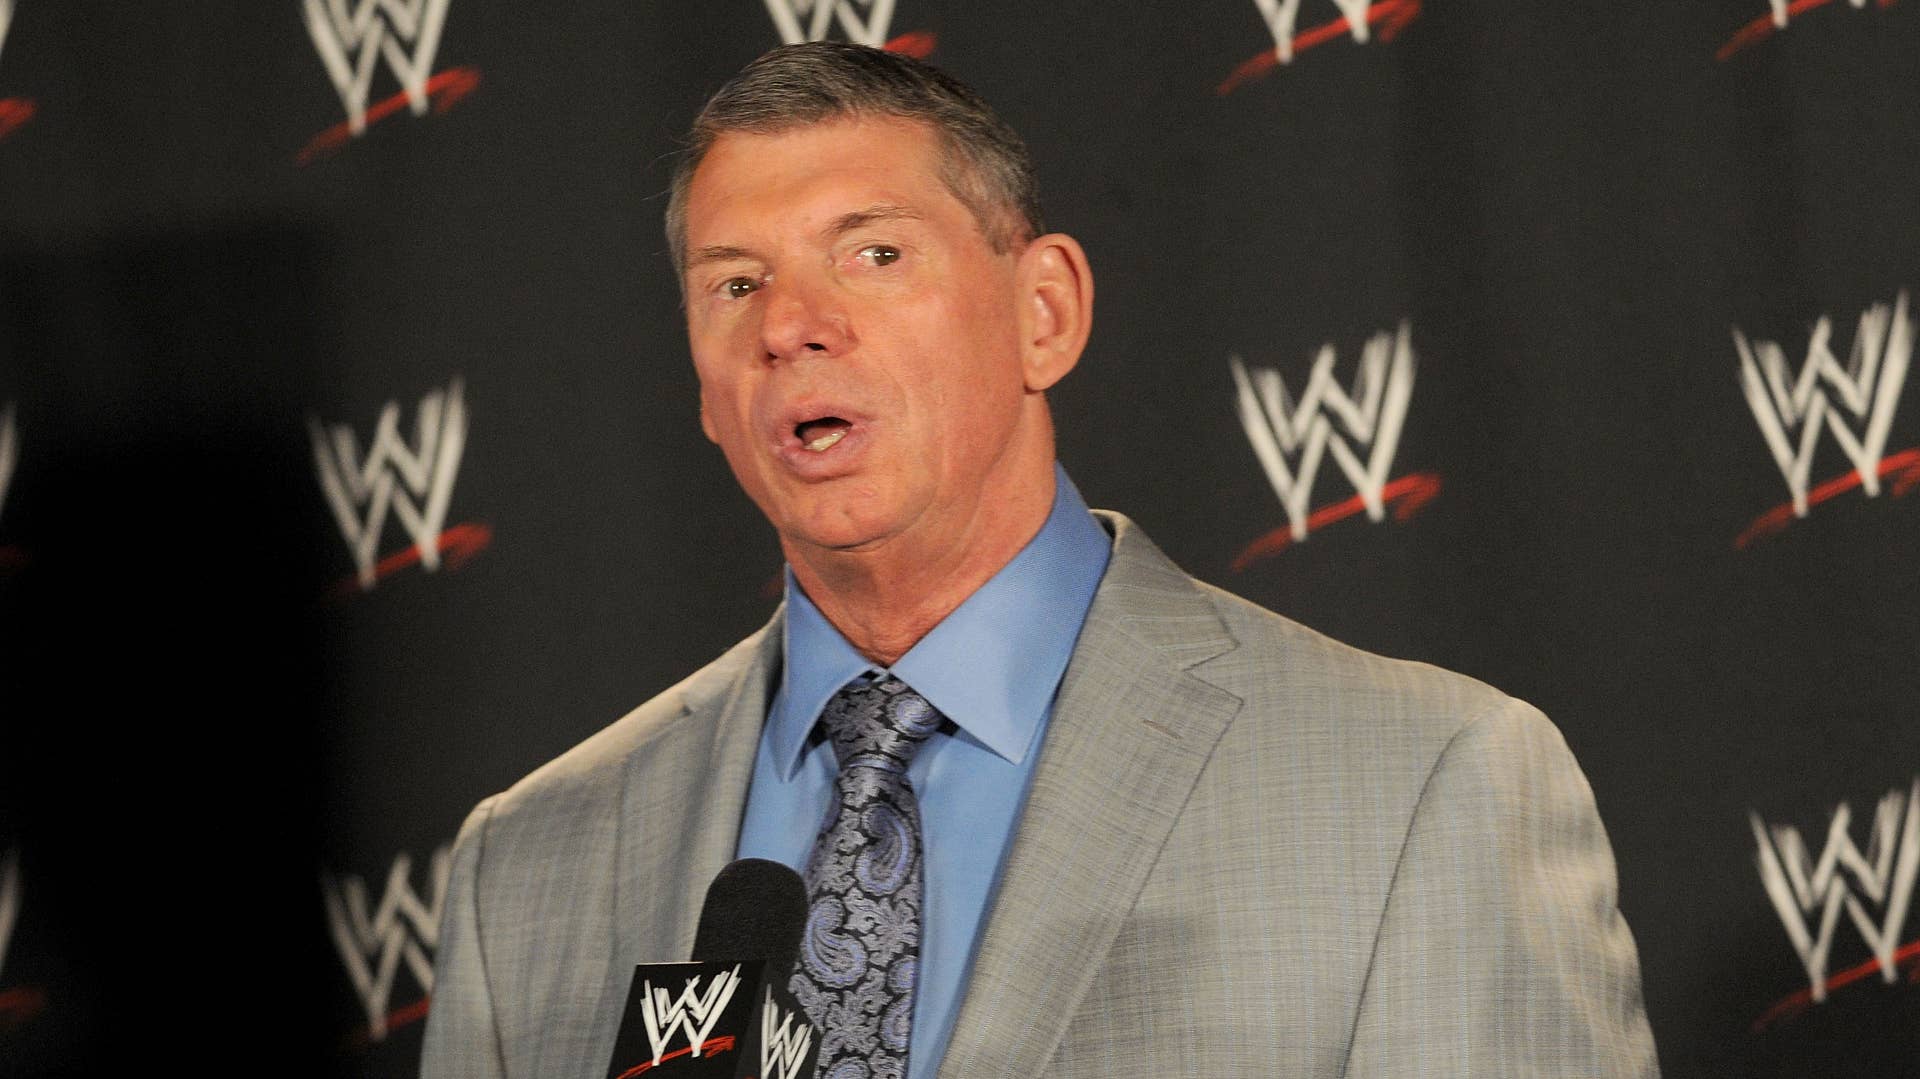 Vince McMahon attends the World Wrestling Entertainment "Denver Debacle" press conference.